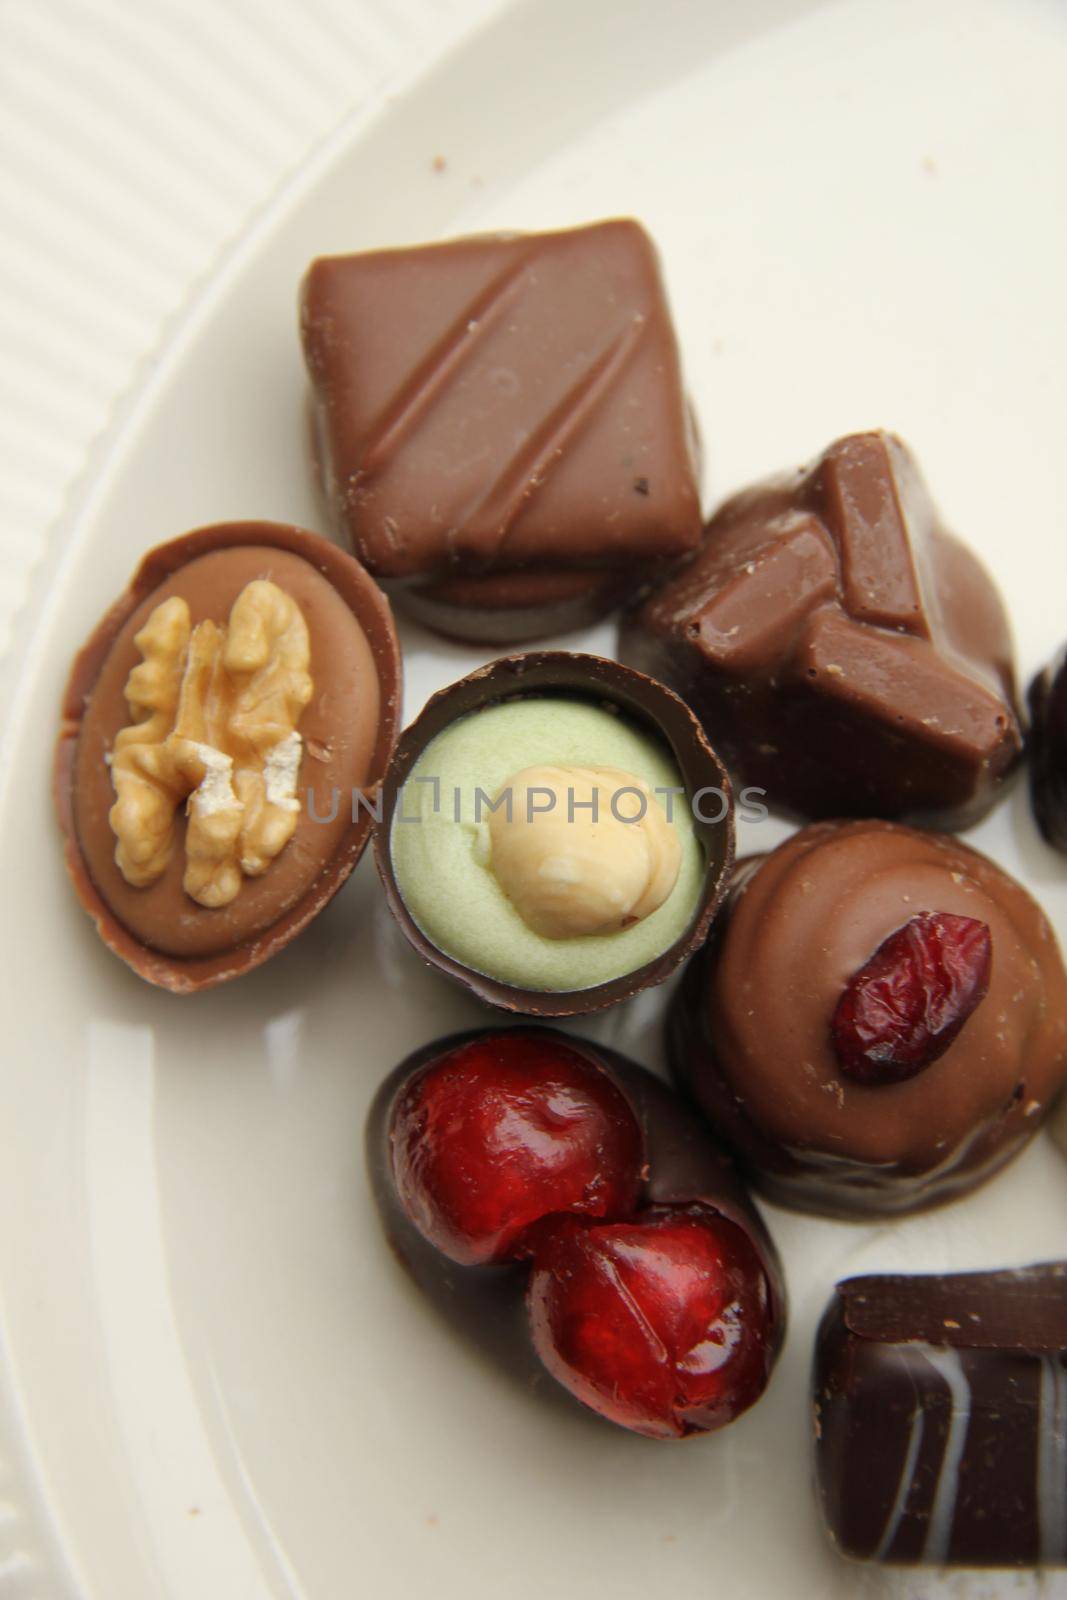 Delicious chocolates from Belgium, decorated with nuts and fruits